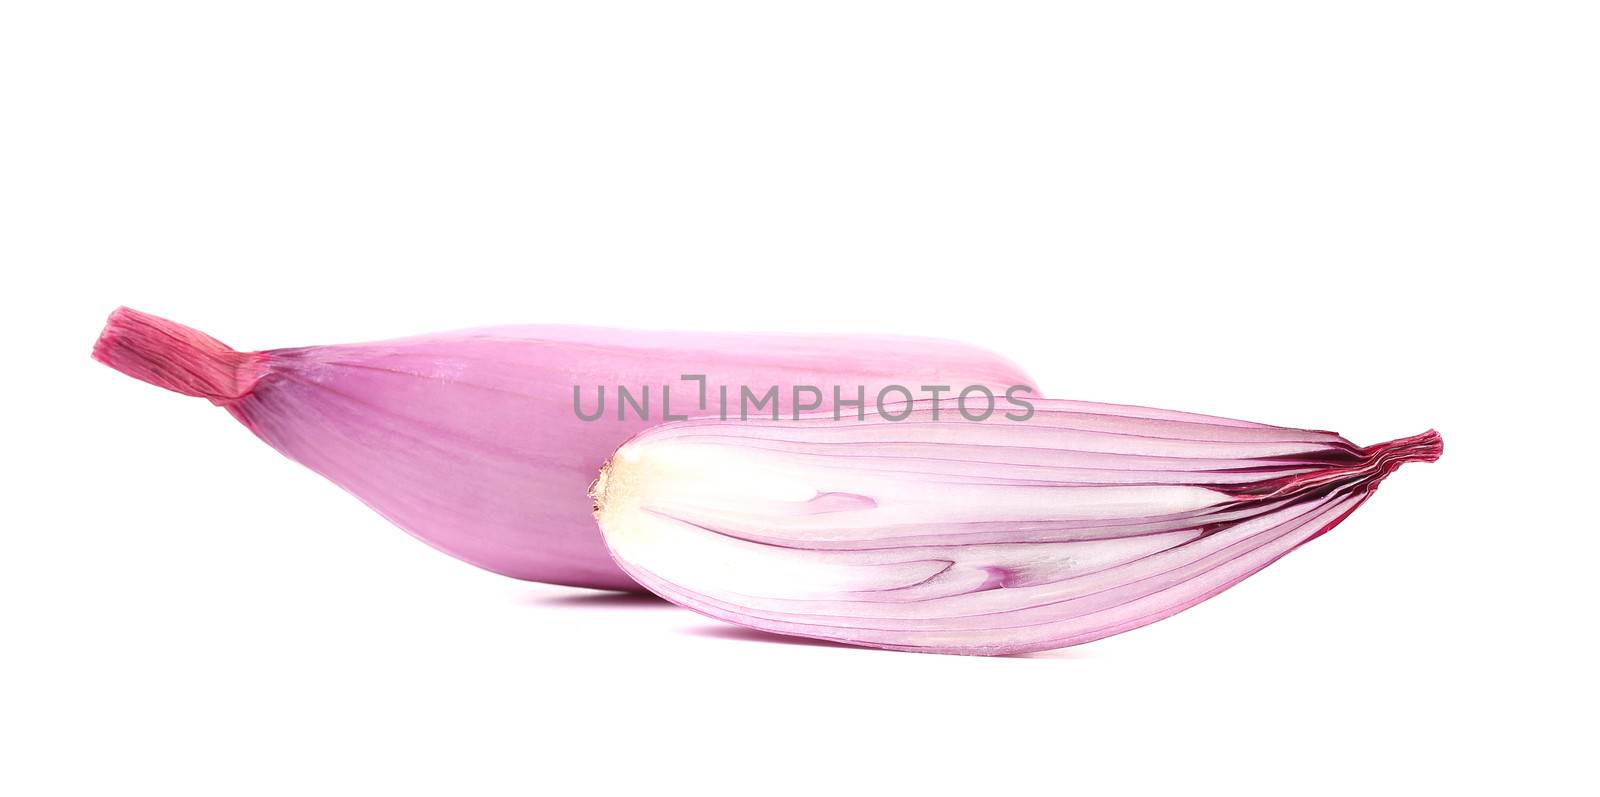 Organic red onion. Slice. Isolated on a white background.